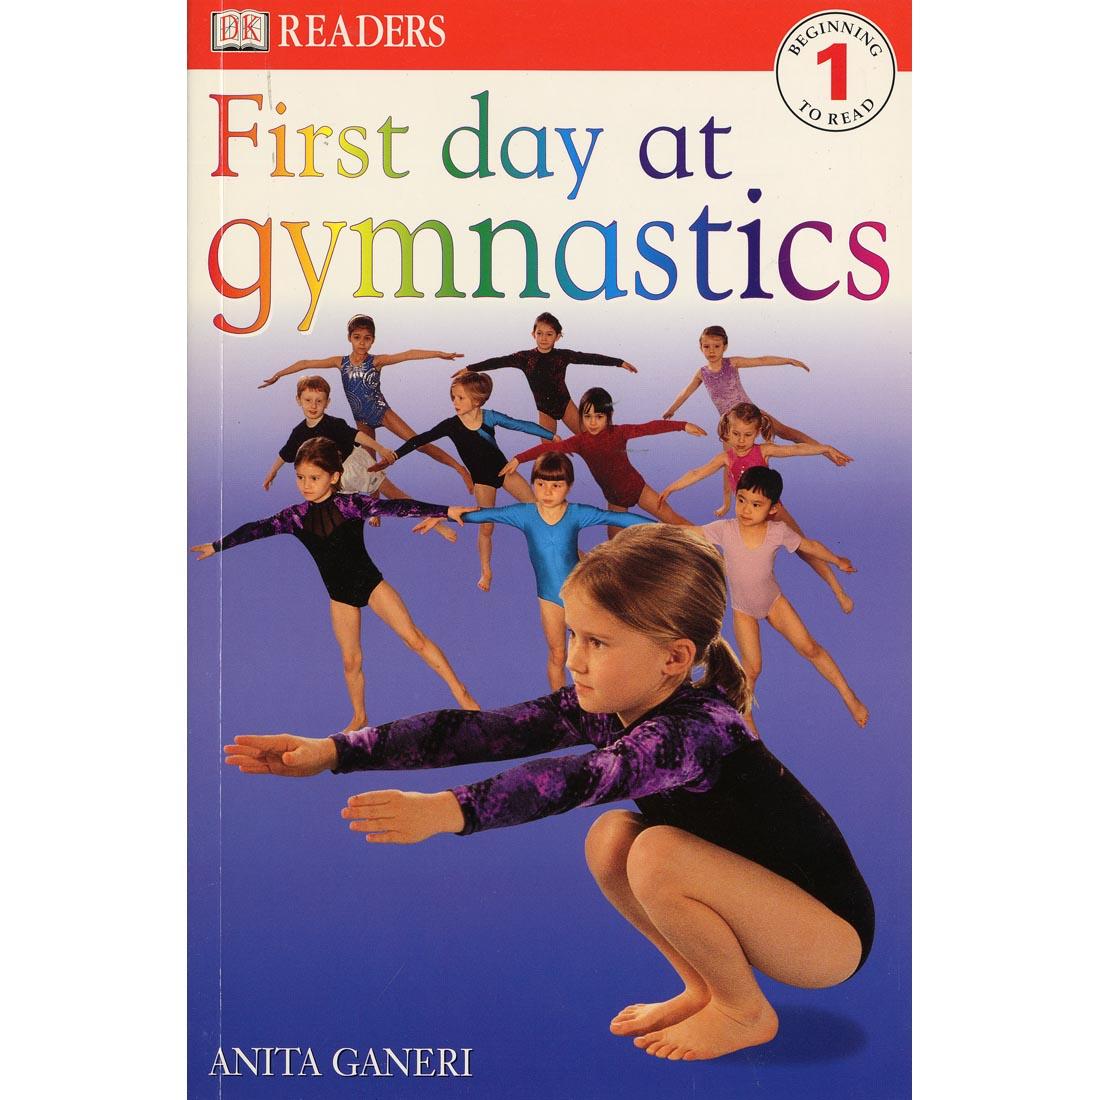 DK Readers Level 1 Book: First Day At Gymnastics